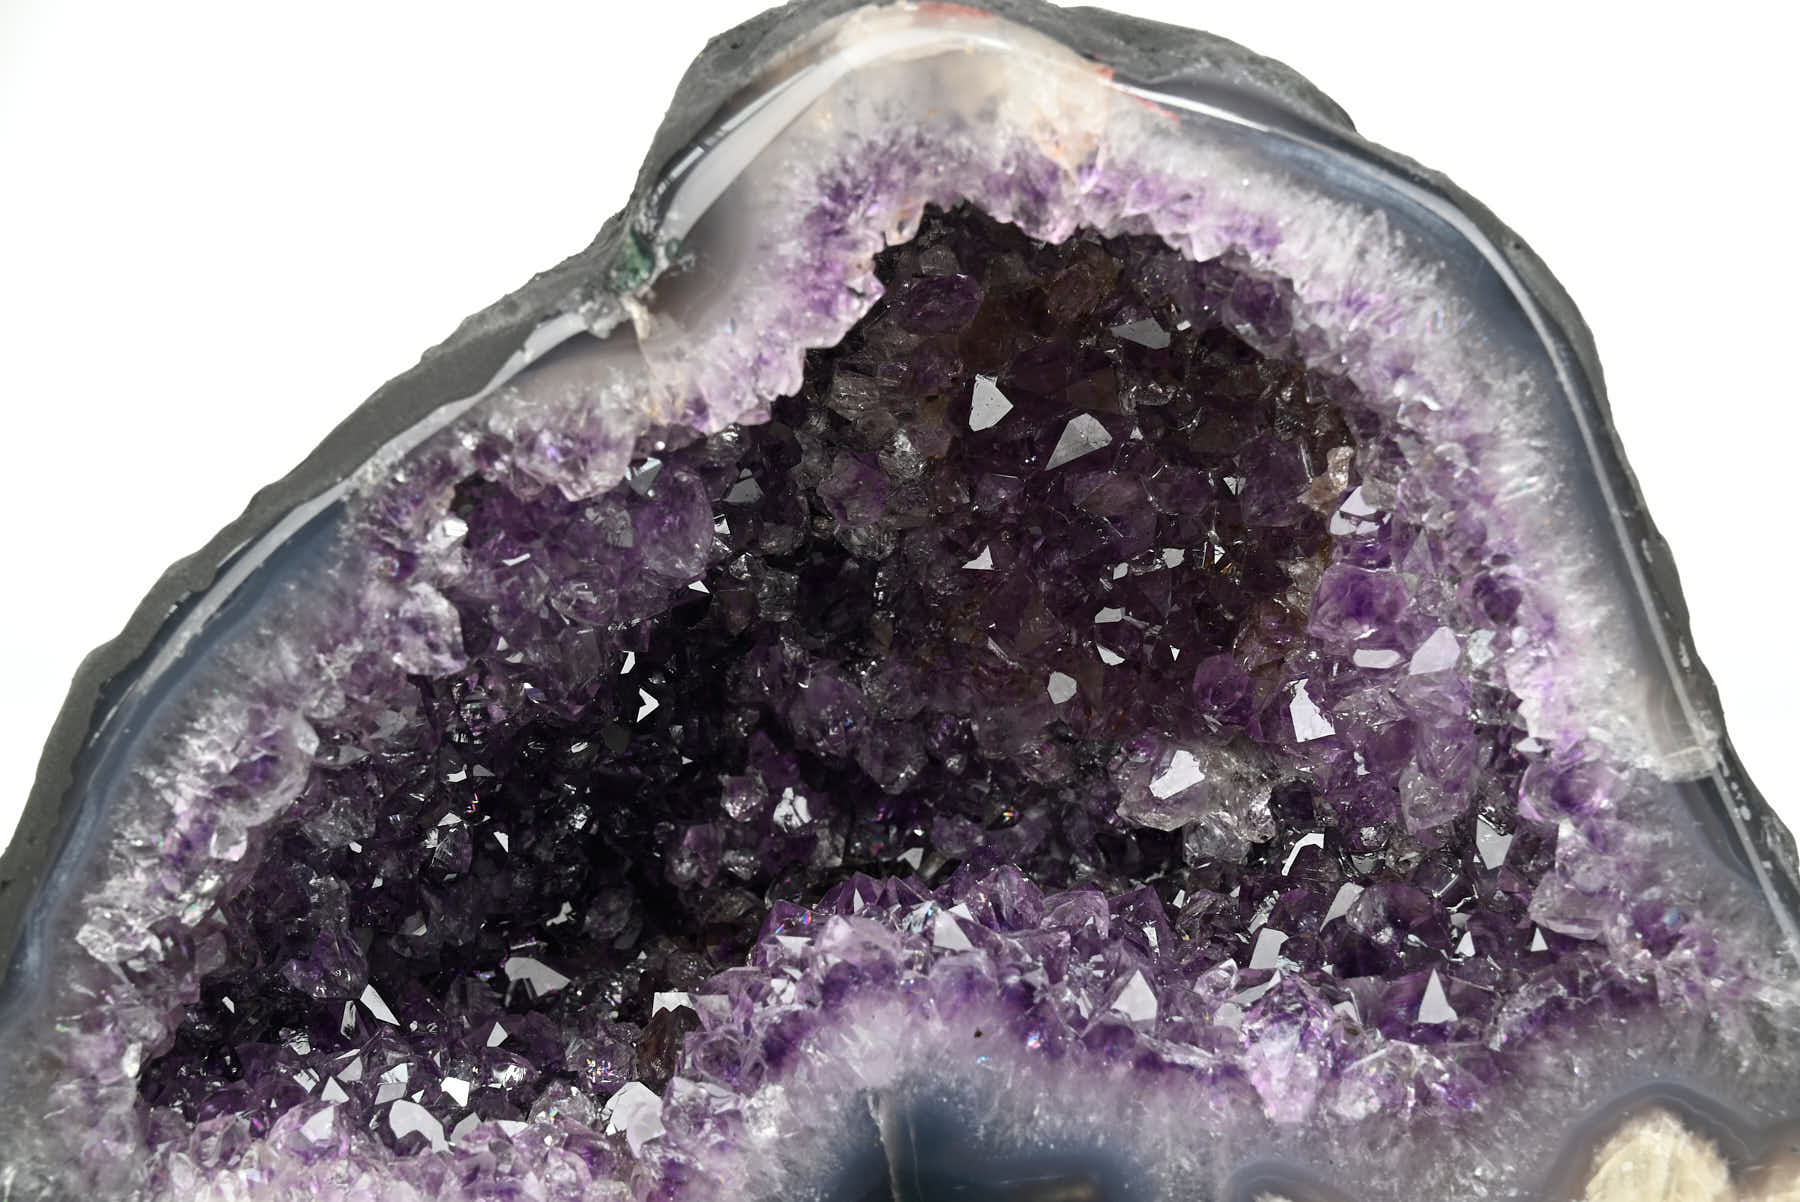 Extra Quality Amethyst Cathedral - 2.66kg, 14cm tall - #CAAMET-10053